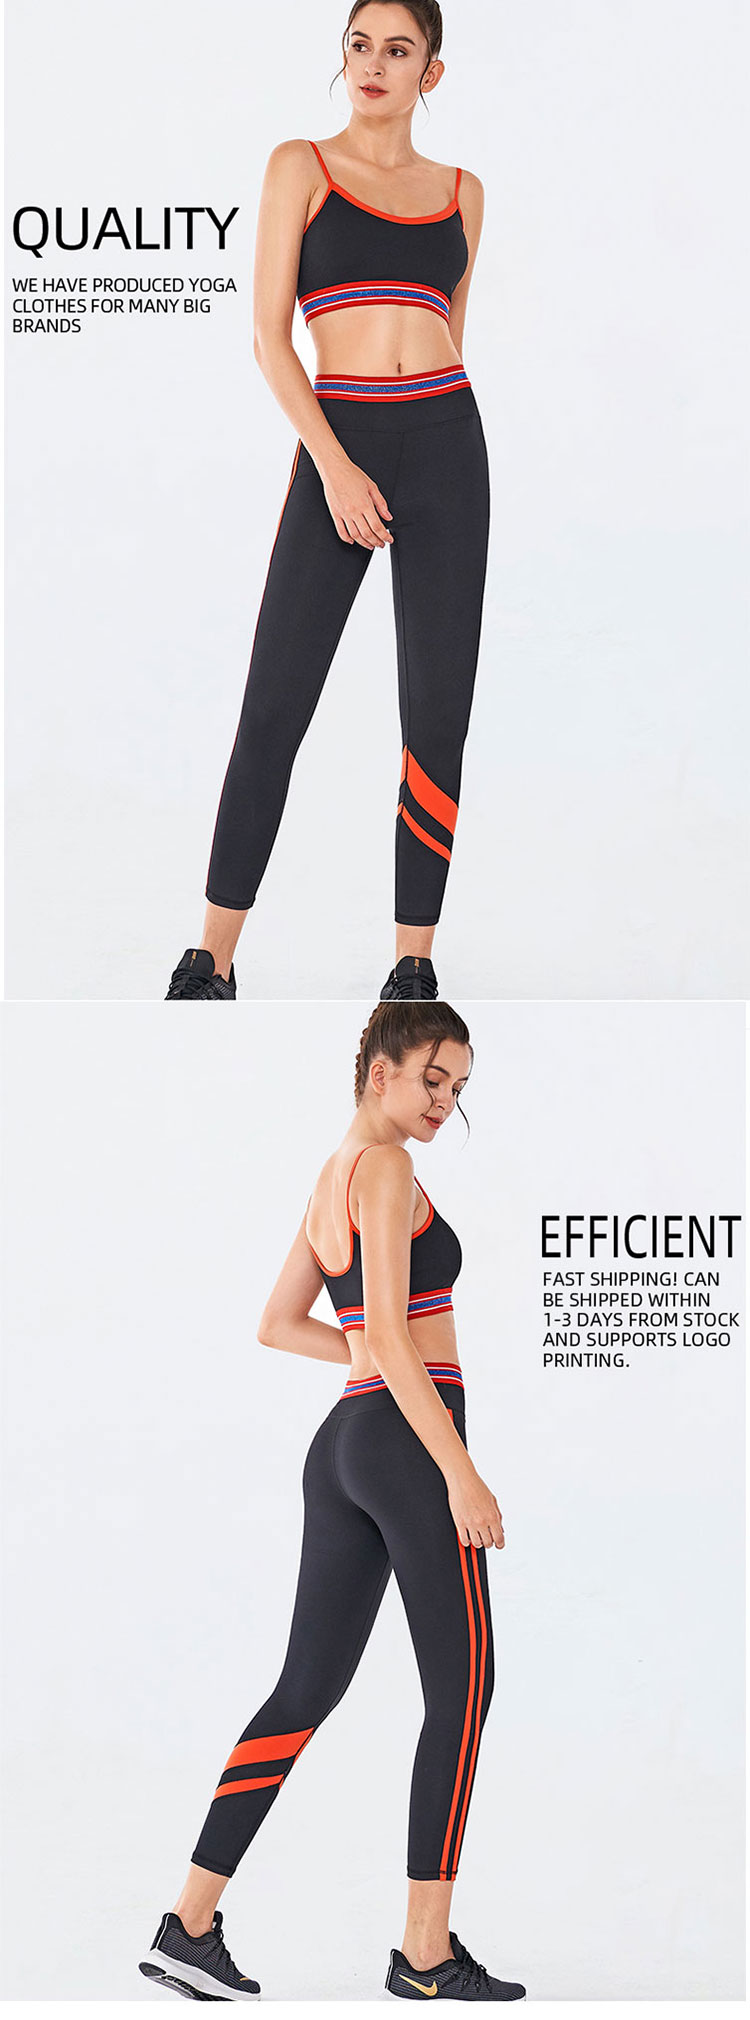 Quality-we-have-produced-yoga-clothes-for-many-big-brands